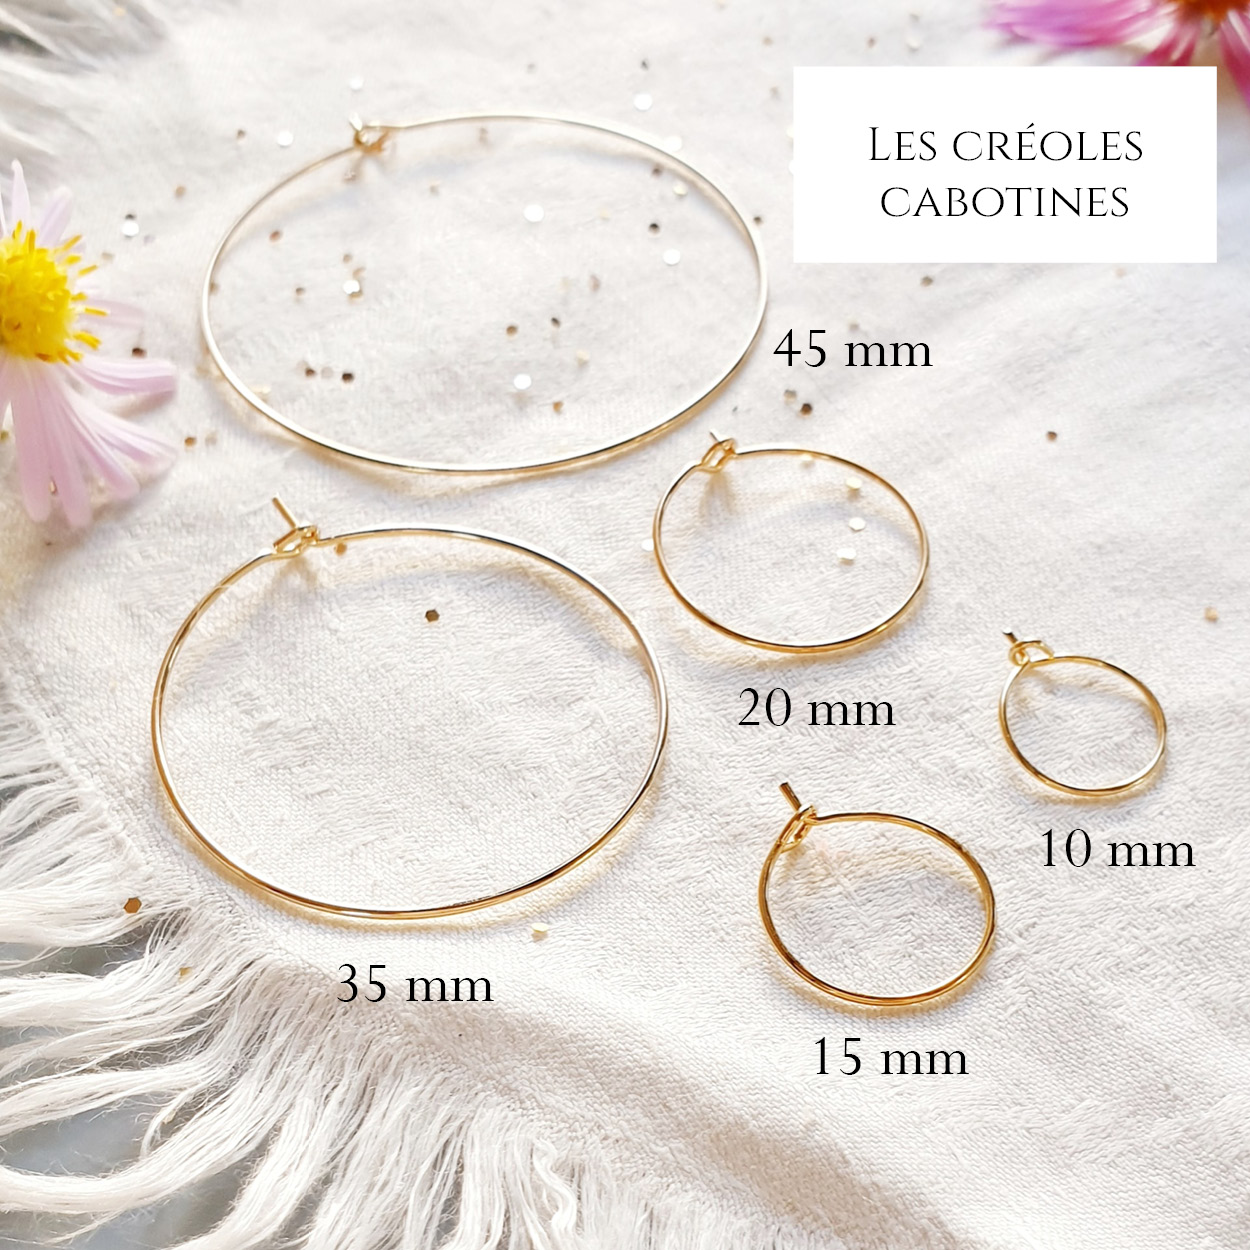 admin bo creoles lisses cabotines taille